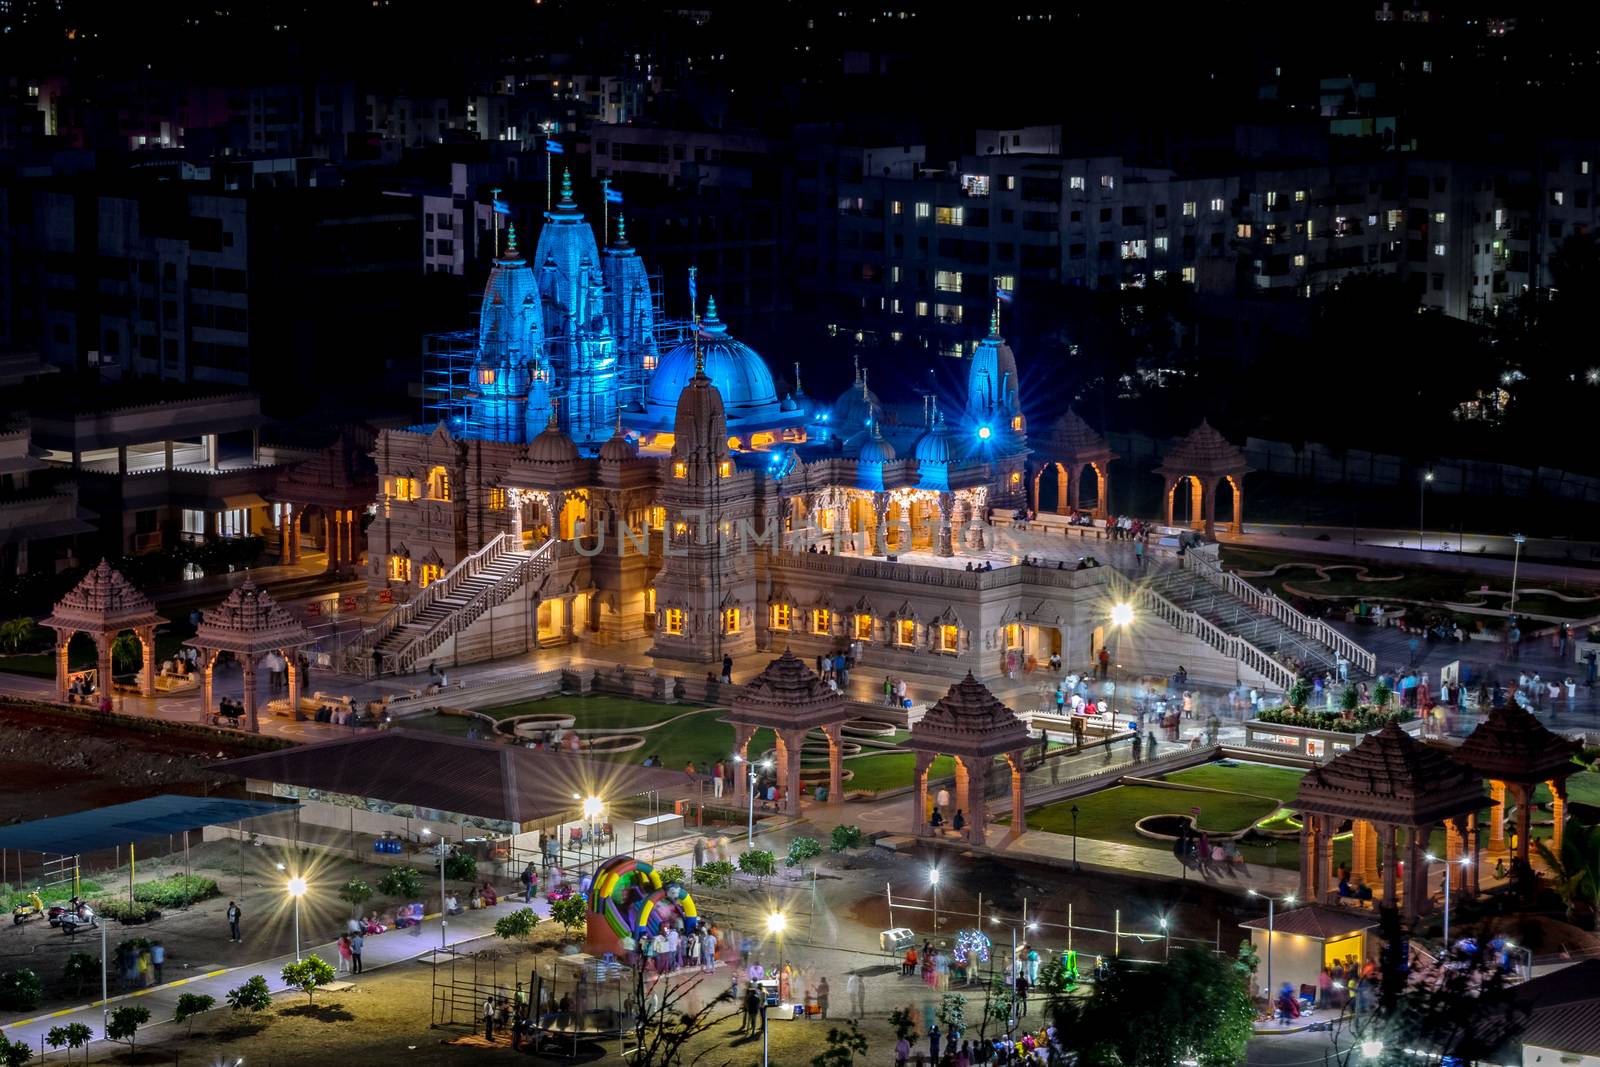 Night time lighting on Shree Swaminarayan temple at night, Pune, India. by lalam